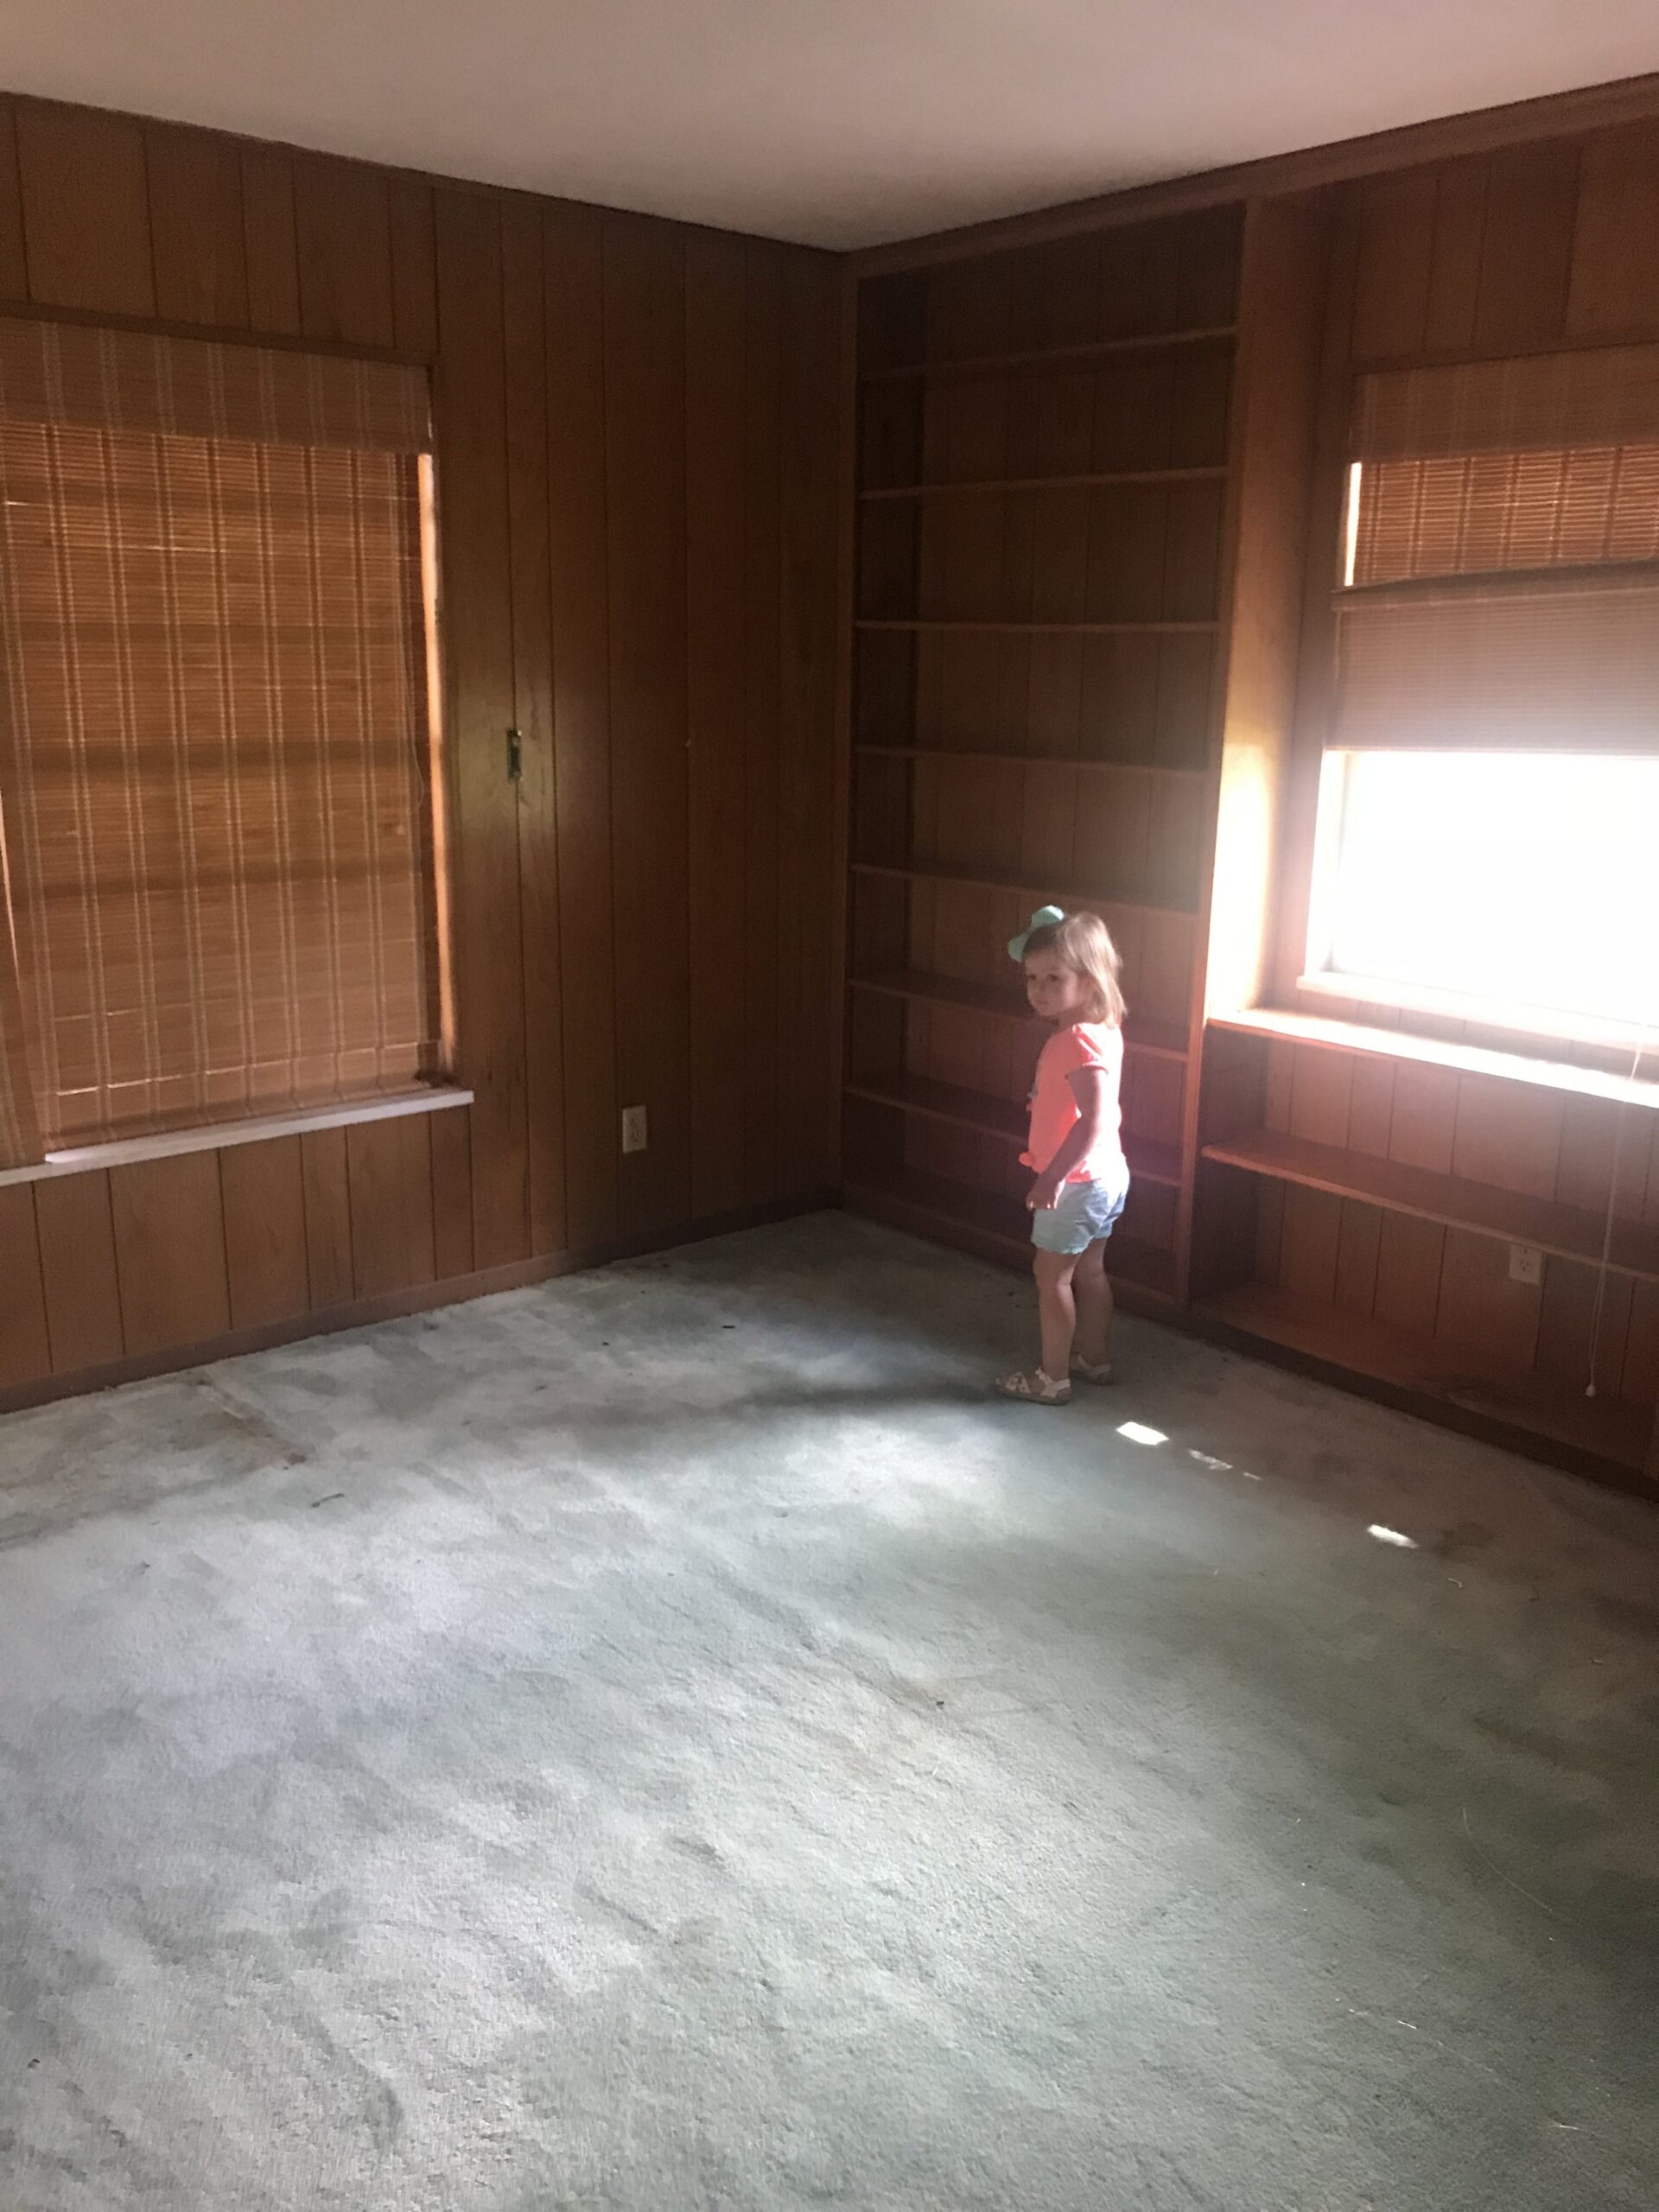 This is the current study that we are moving the master bedroom to. We are adding an additional window in this room to frame the bed in between along the wall Sutton is currently standing next to. Should we keep the wood paneling? Ok ok I’ll stop wi…